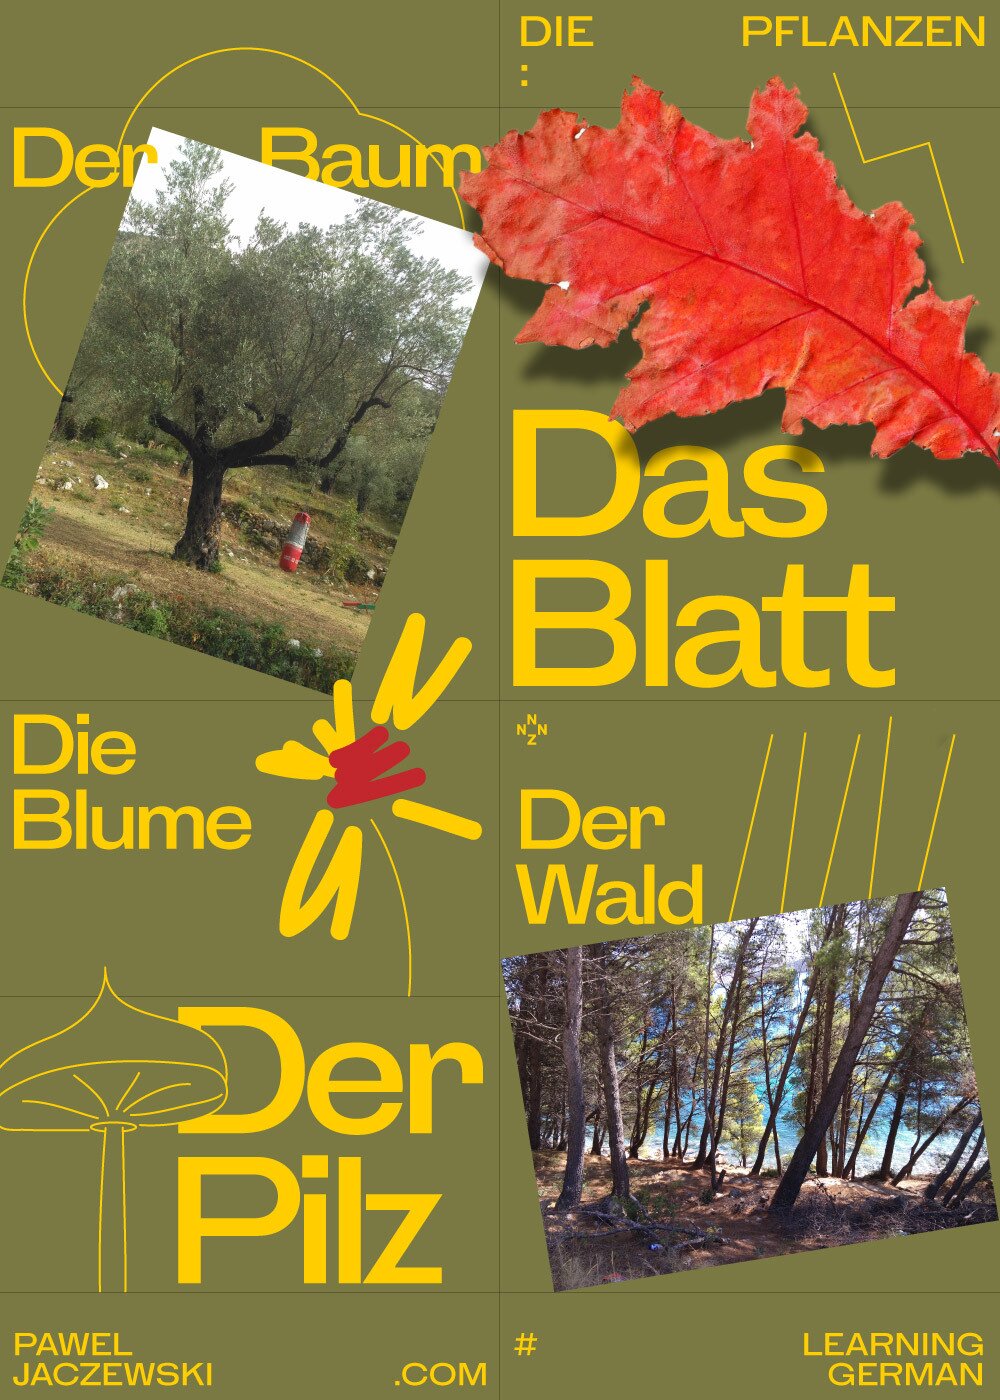 A poster explaining how to name plants in German